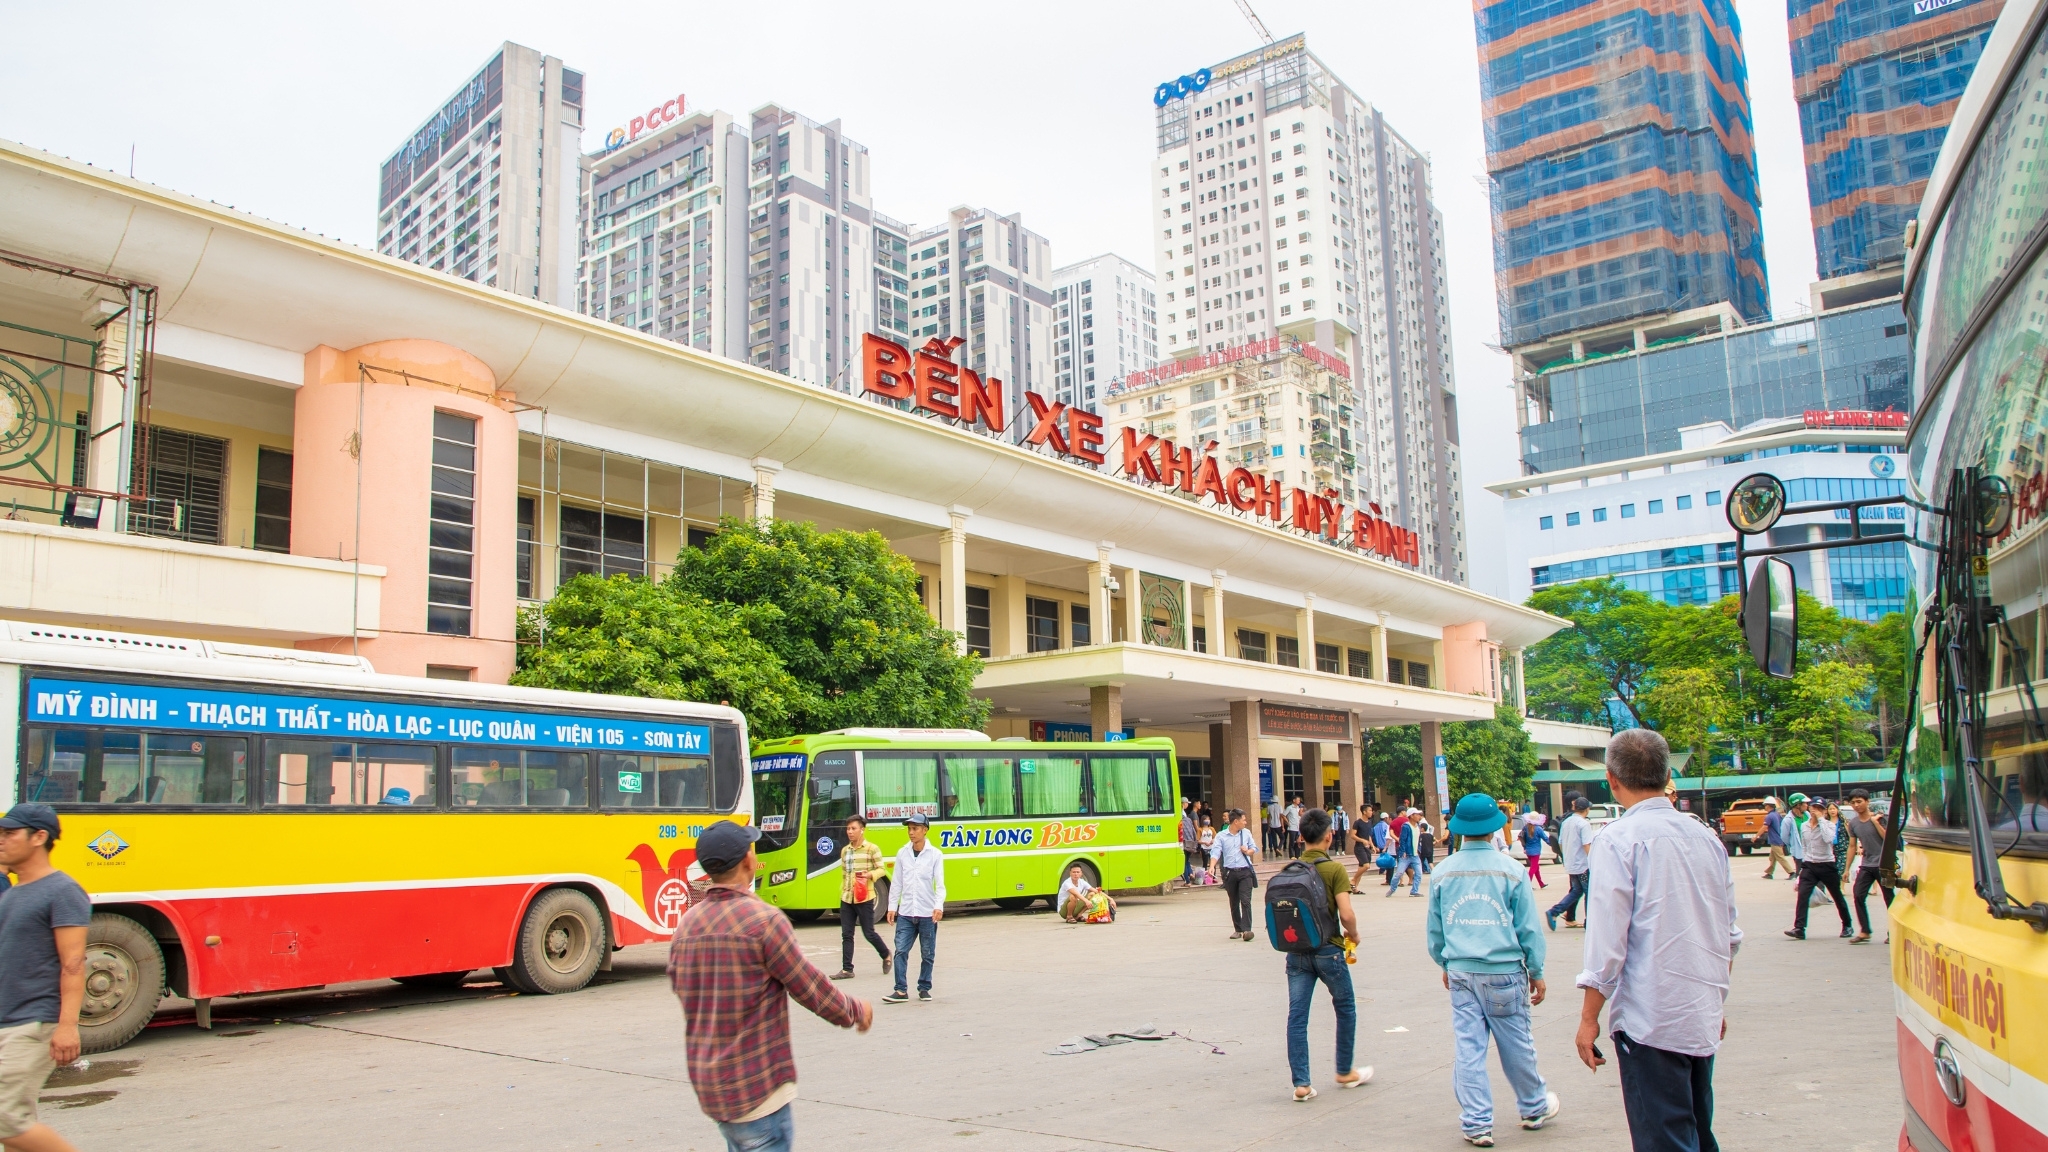 My Dinh Station Is The Common Departure Spot Of Halong Public Buses